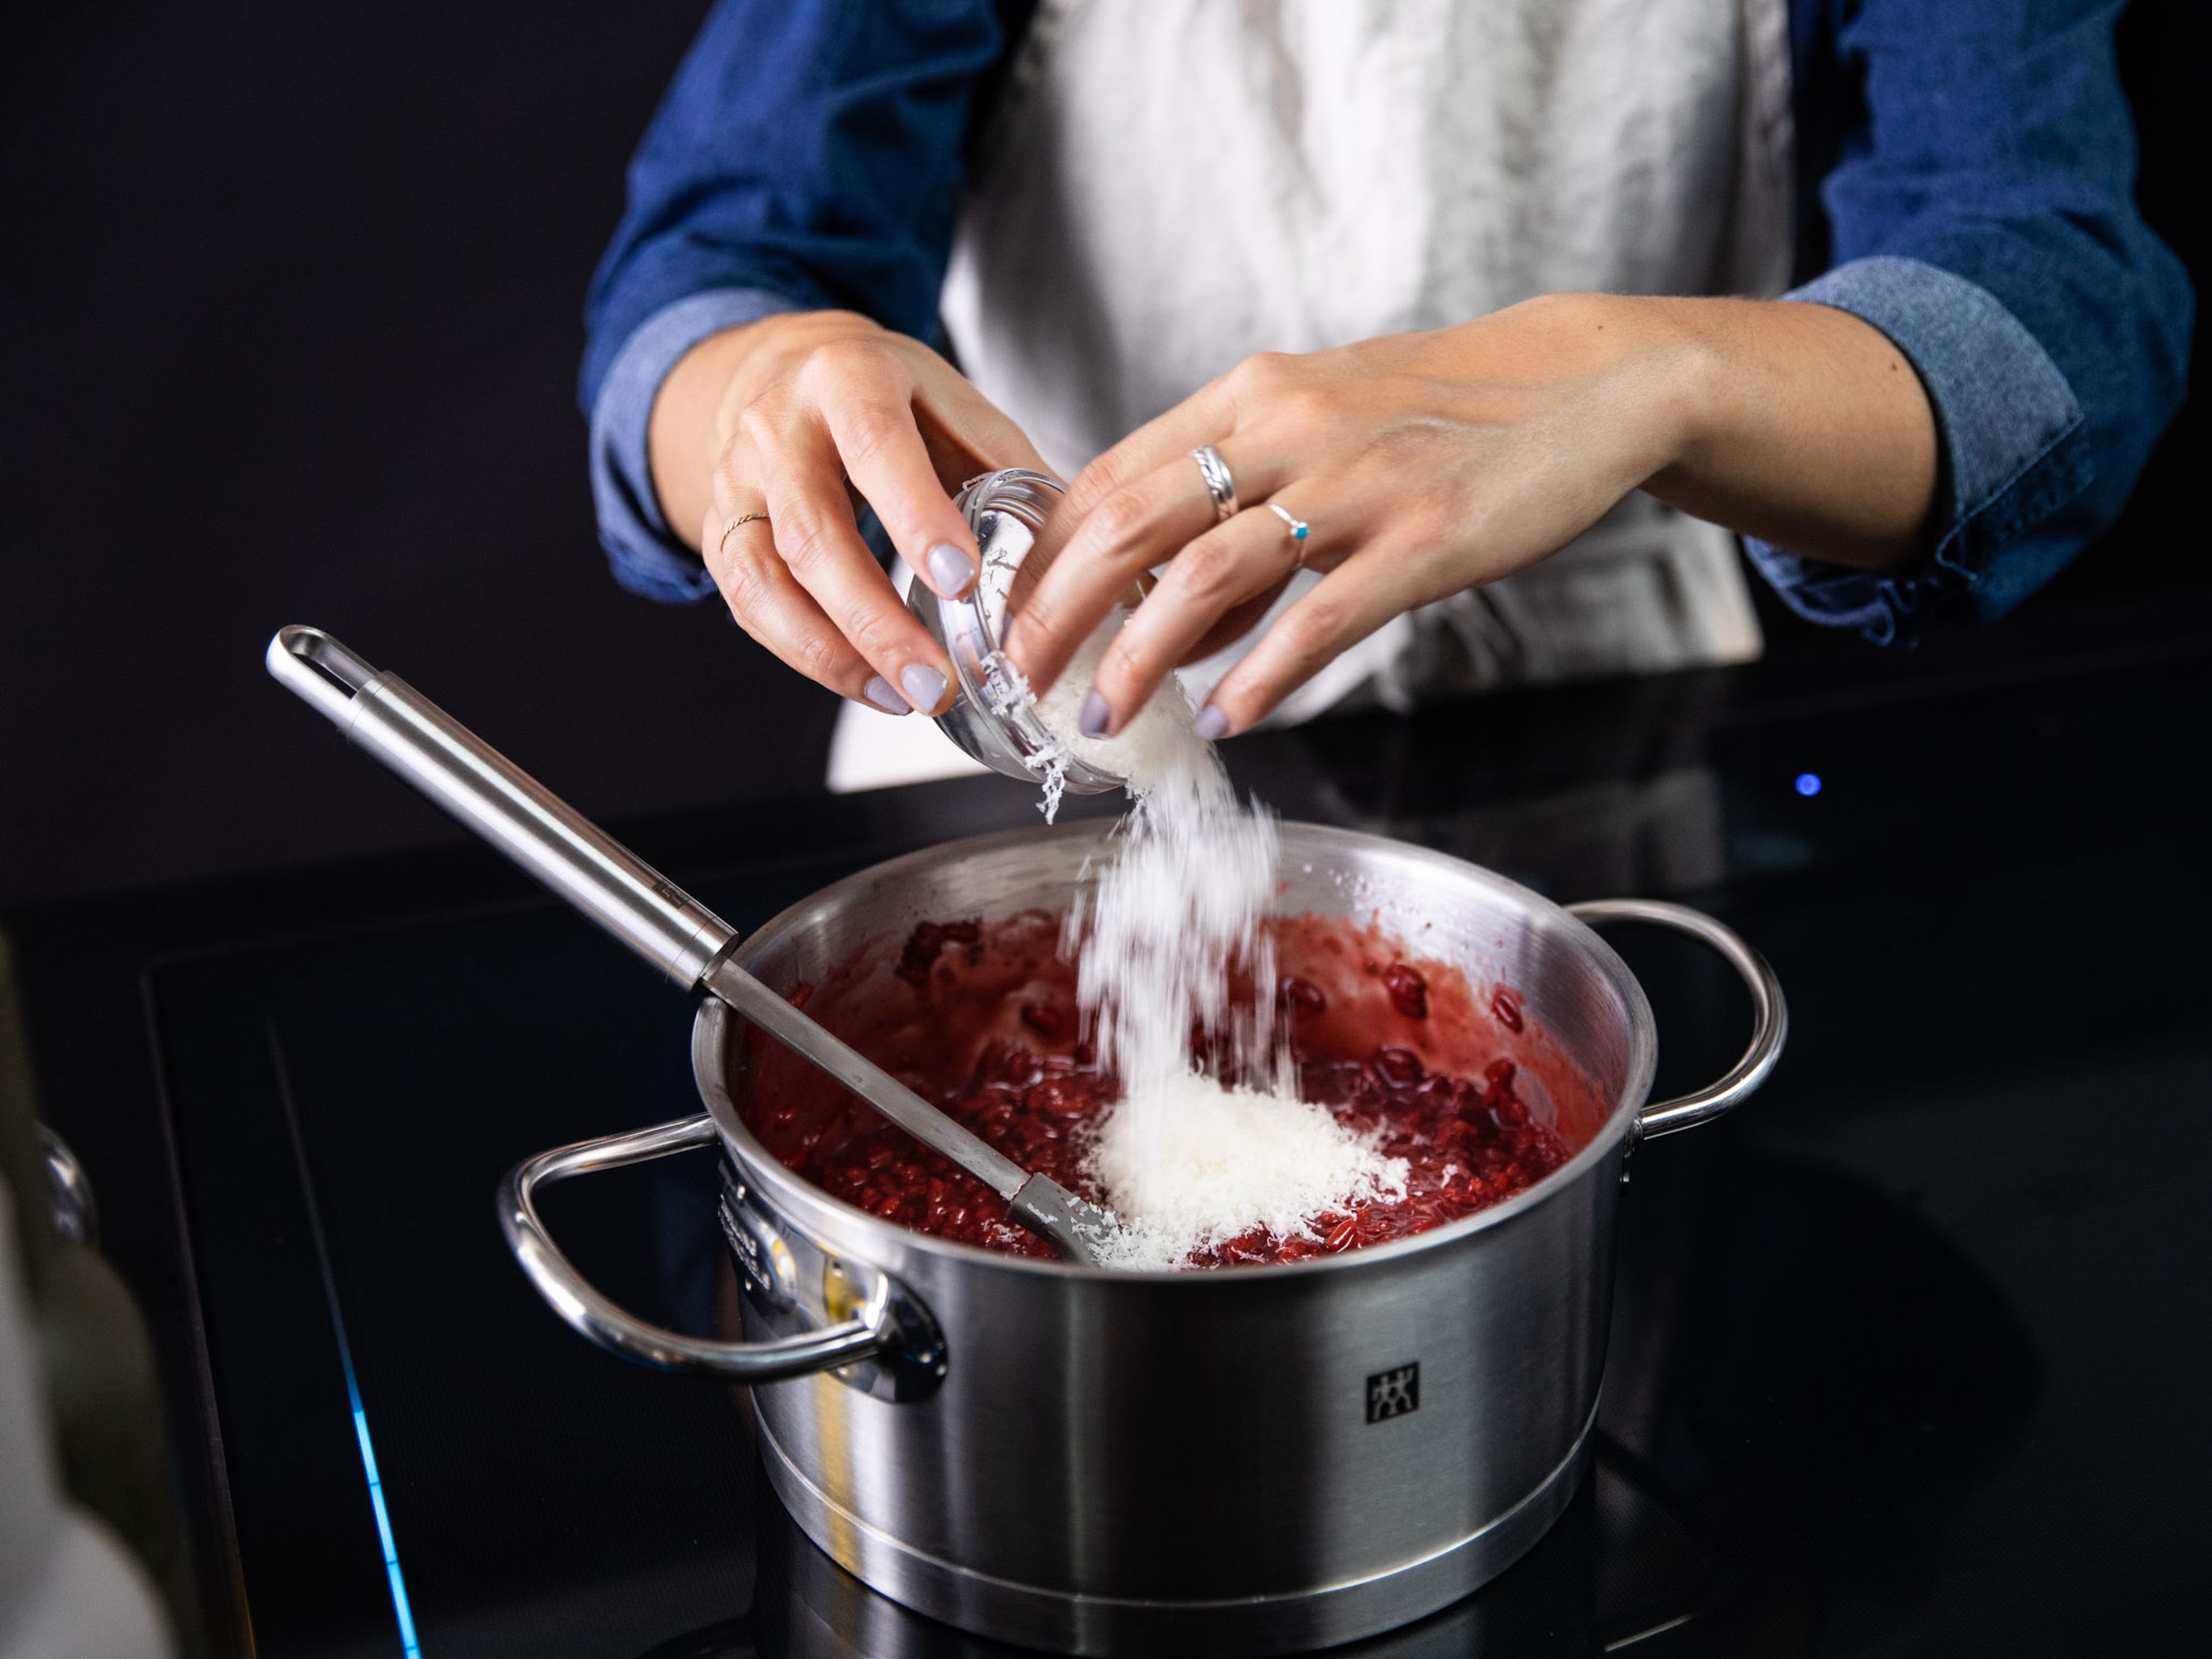 Stir in remaining beet juice and season with salt and pepper. Add a generous amount of Parmesan cheese and a knob of butter to the risotto before serving. Enjoy!